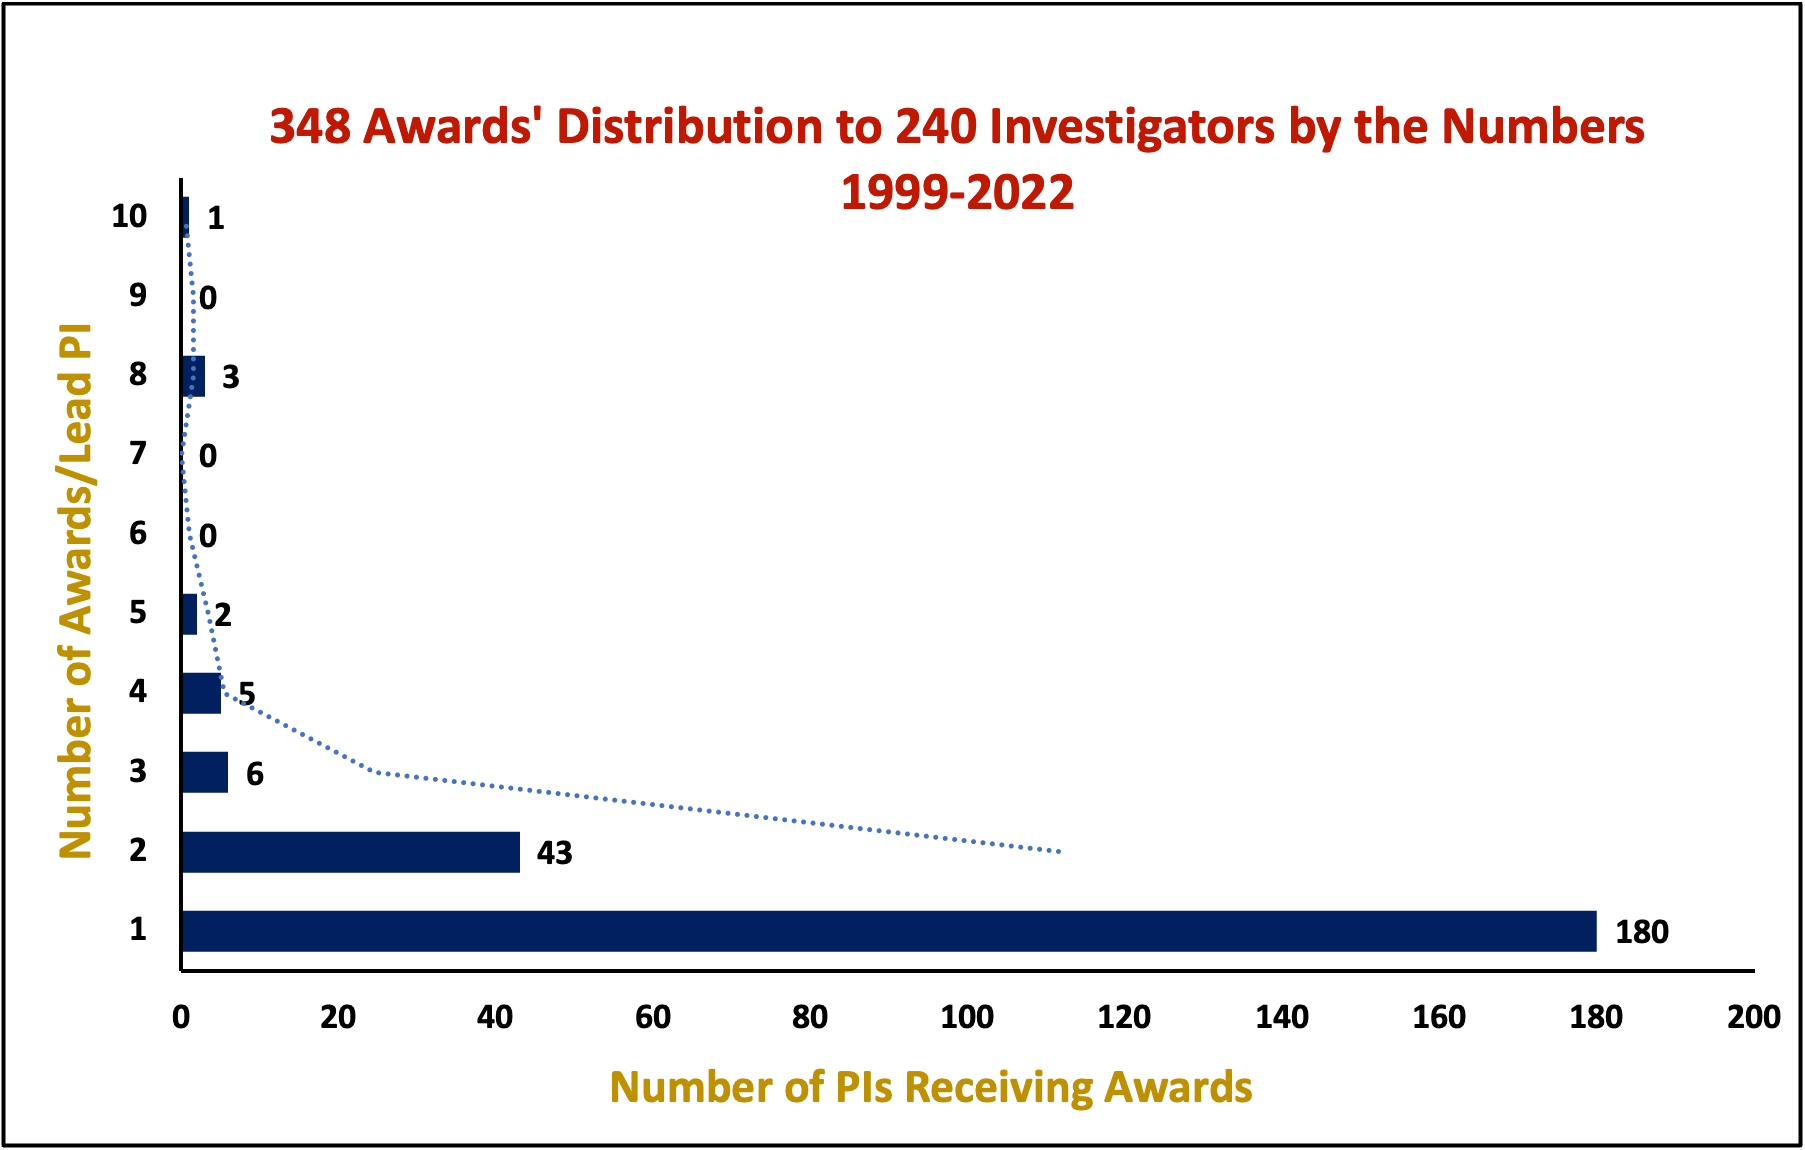 Graph shows 348 awards distribution to 240 investigators by the numbers, years 1999-2022. 1 award was given to 180 PIs, 2 awards to 43 PIs, 3 awards to 6 PIs, 4 awards to 5 PIs, and th rest (5 to 10 awards) is between 0 and 5.